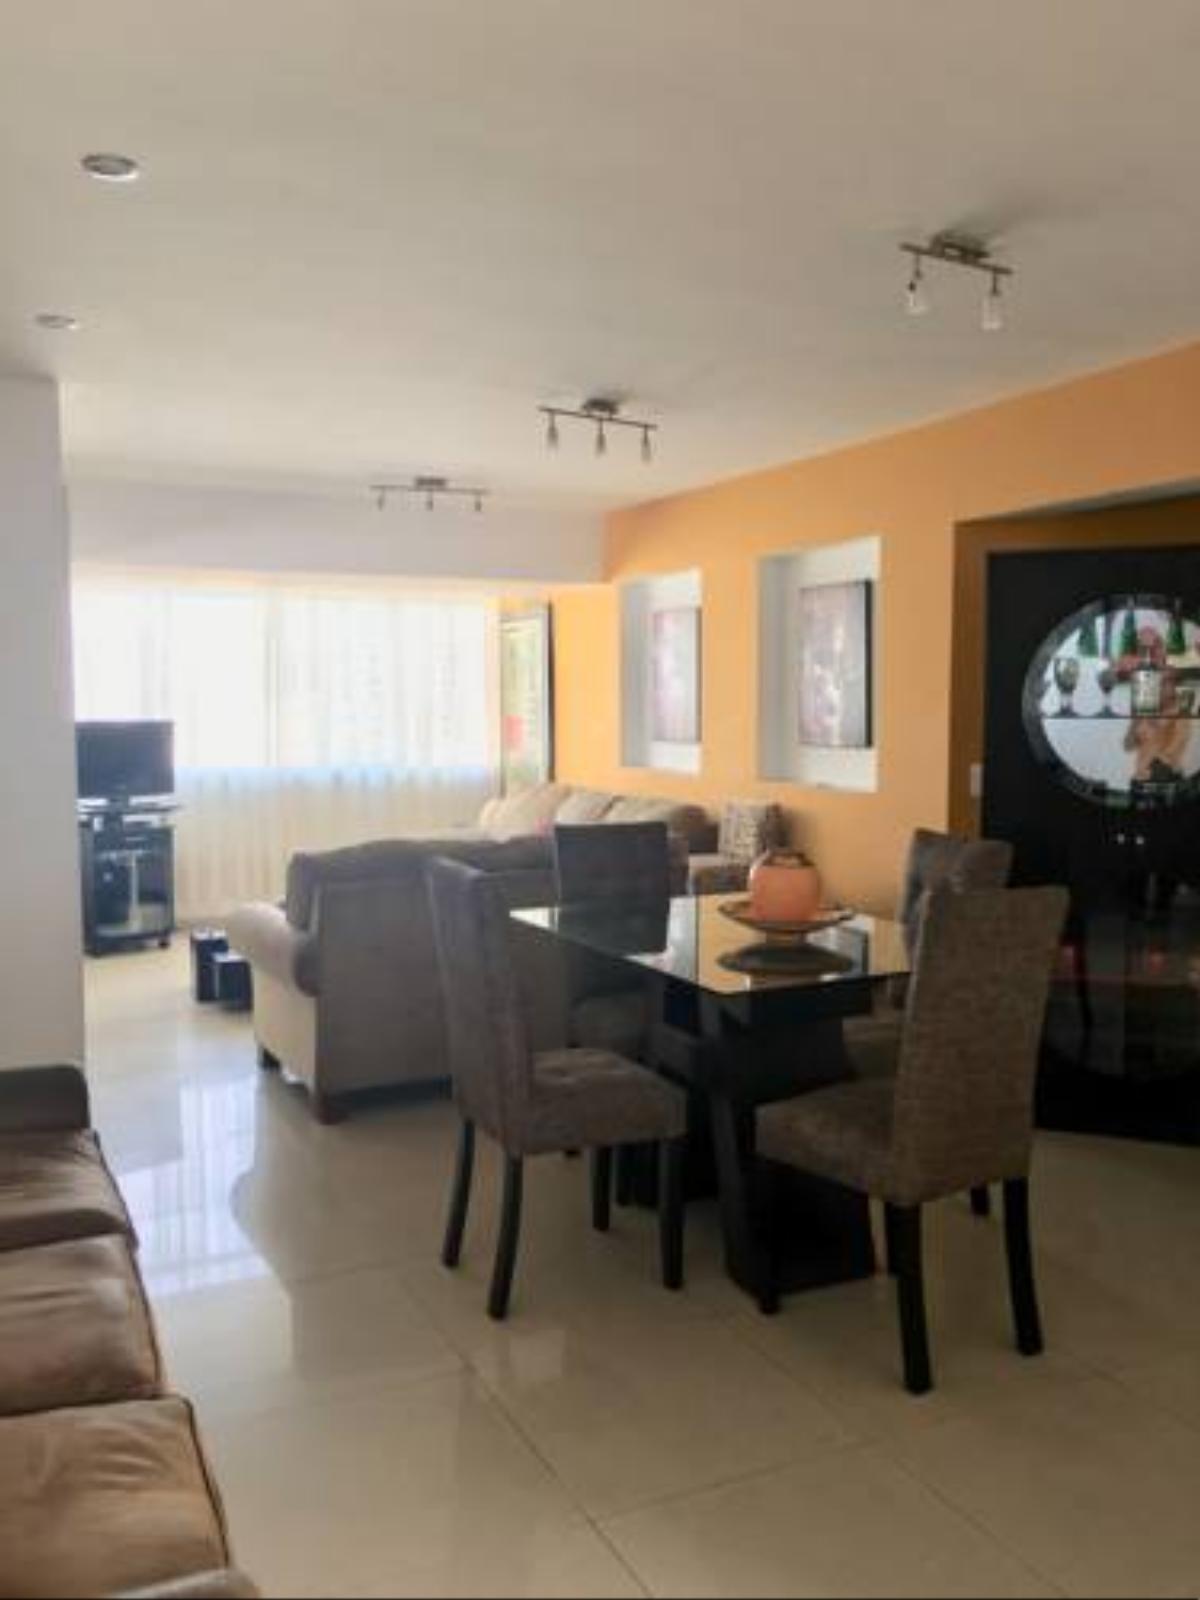 MIRAFLORES PENTHOUSE FOR 13, 5 Rooms/4 baths - Excelent Location Hotel Lima Peru